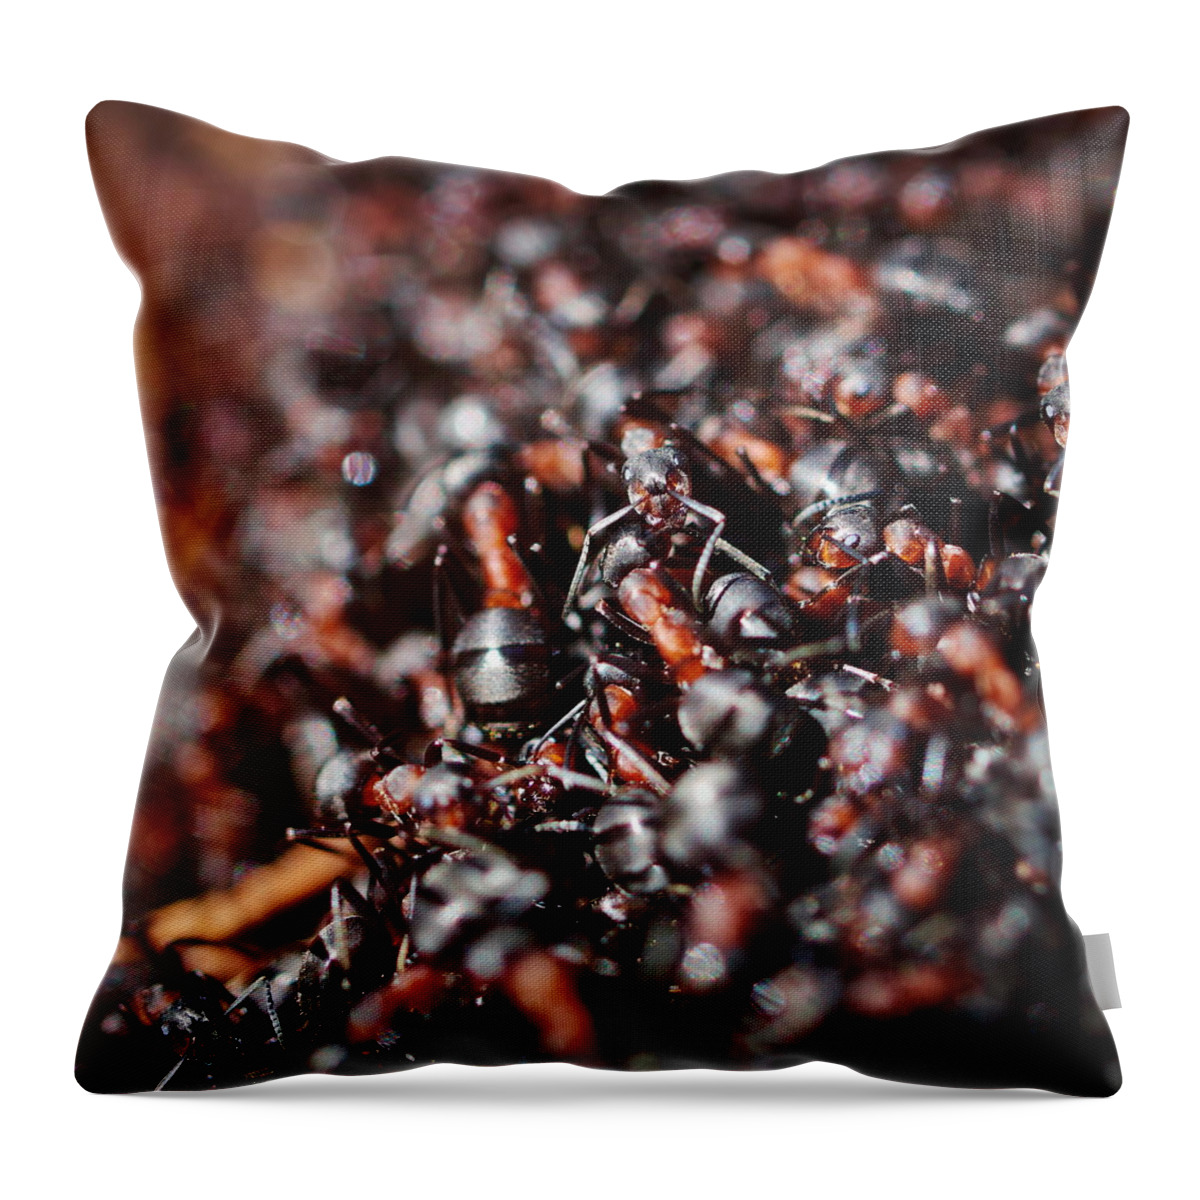 Finland Throw Pillow featuring the photograph Ants #1 by Jouko Lehto